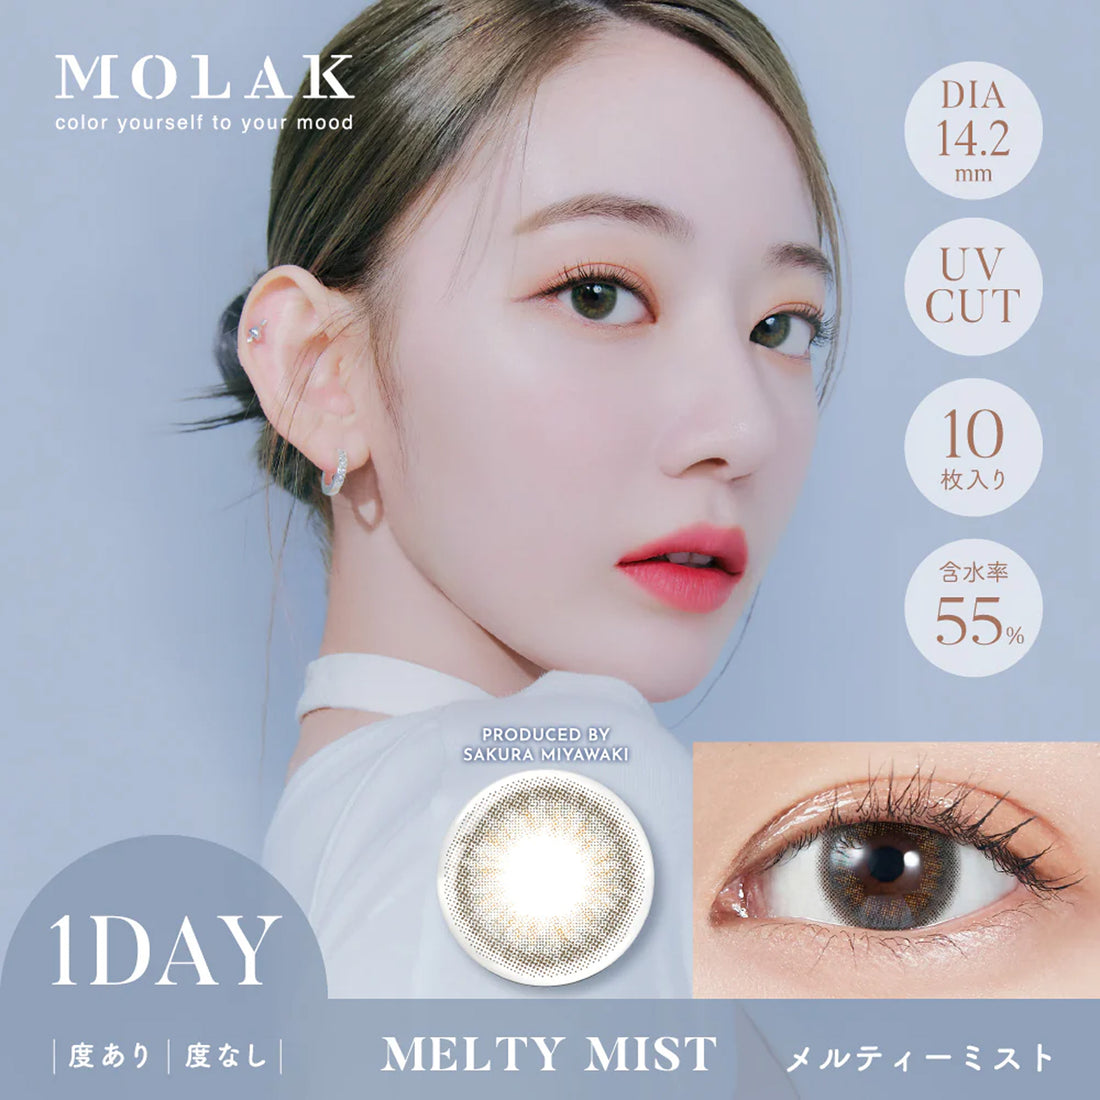 MOLAK Daily Contact Lenses-Melty Mist 10lenses